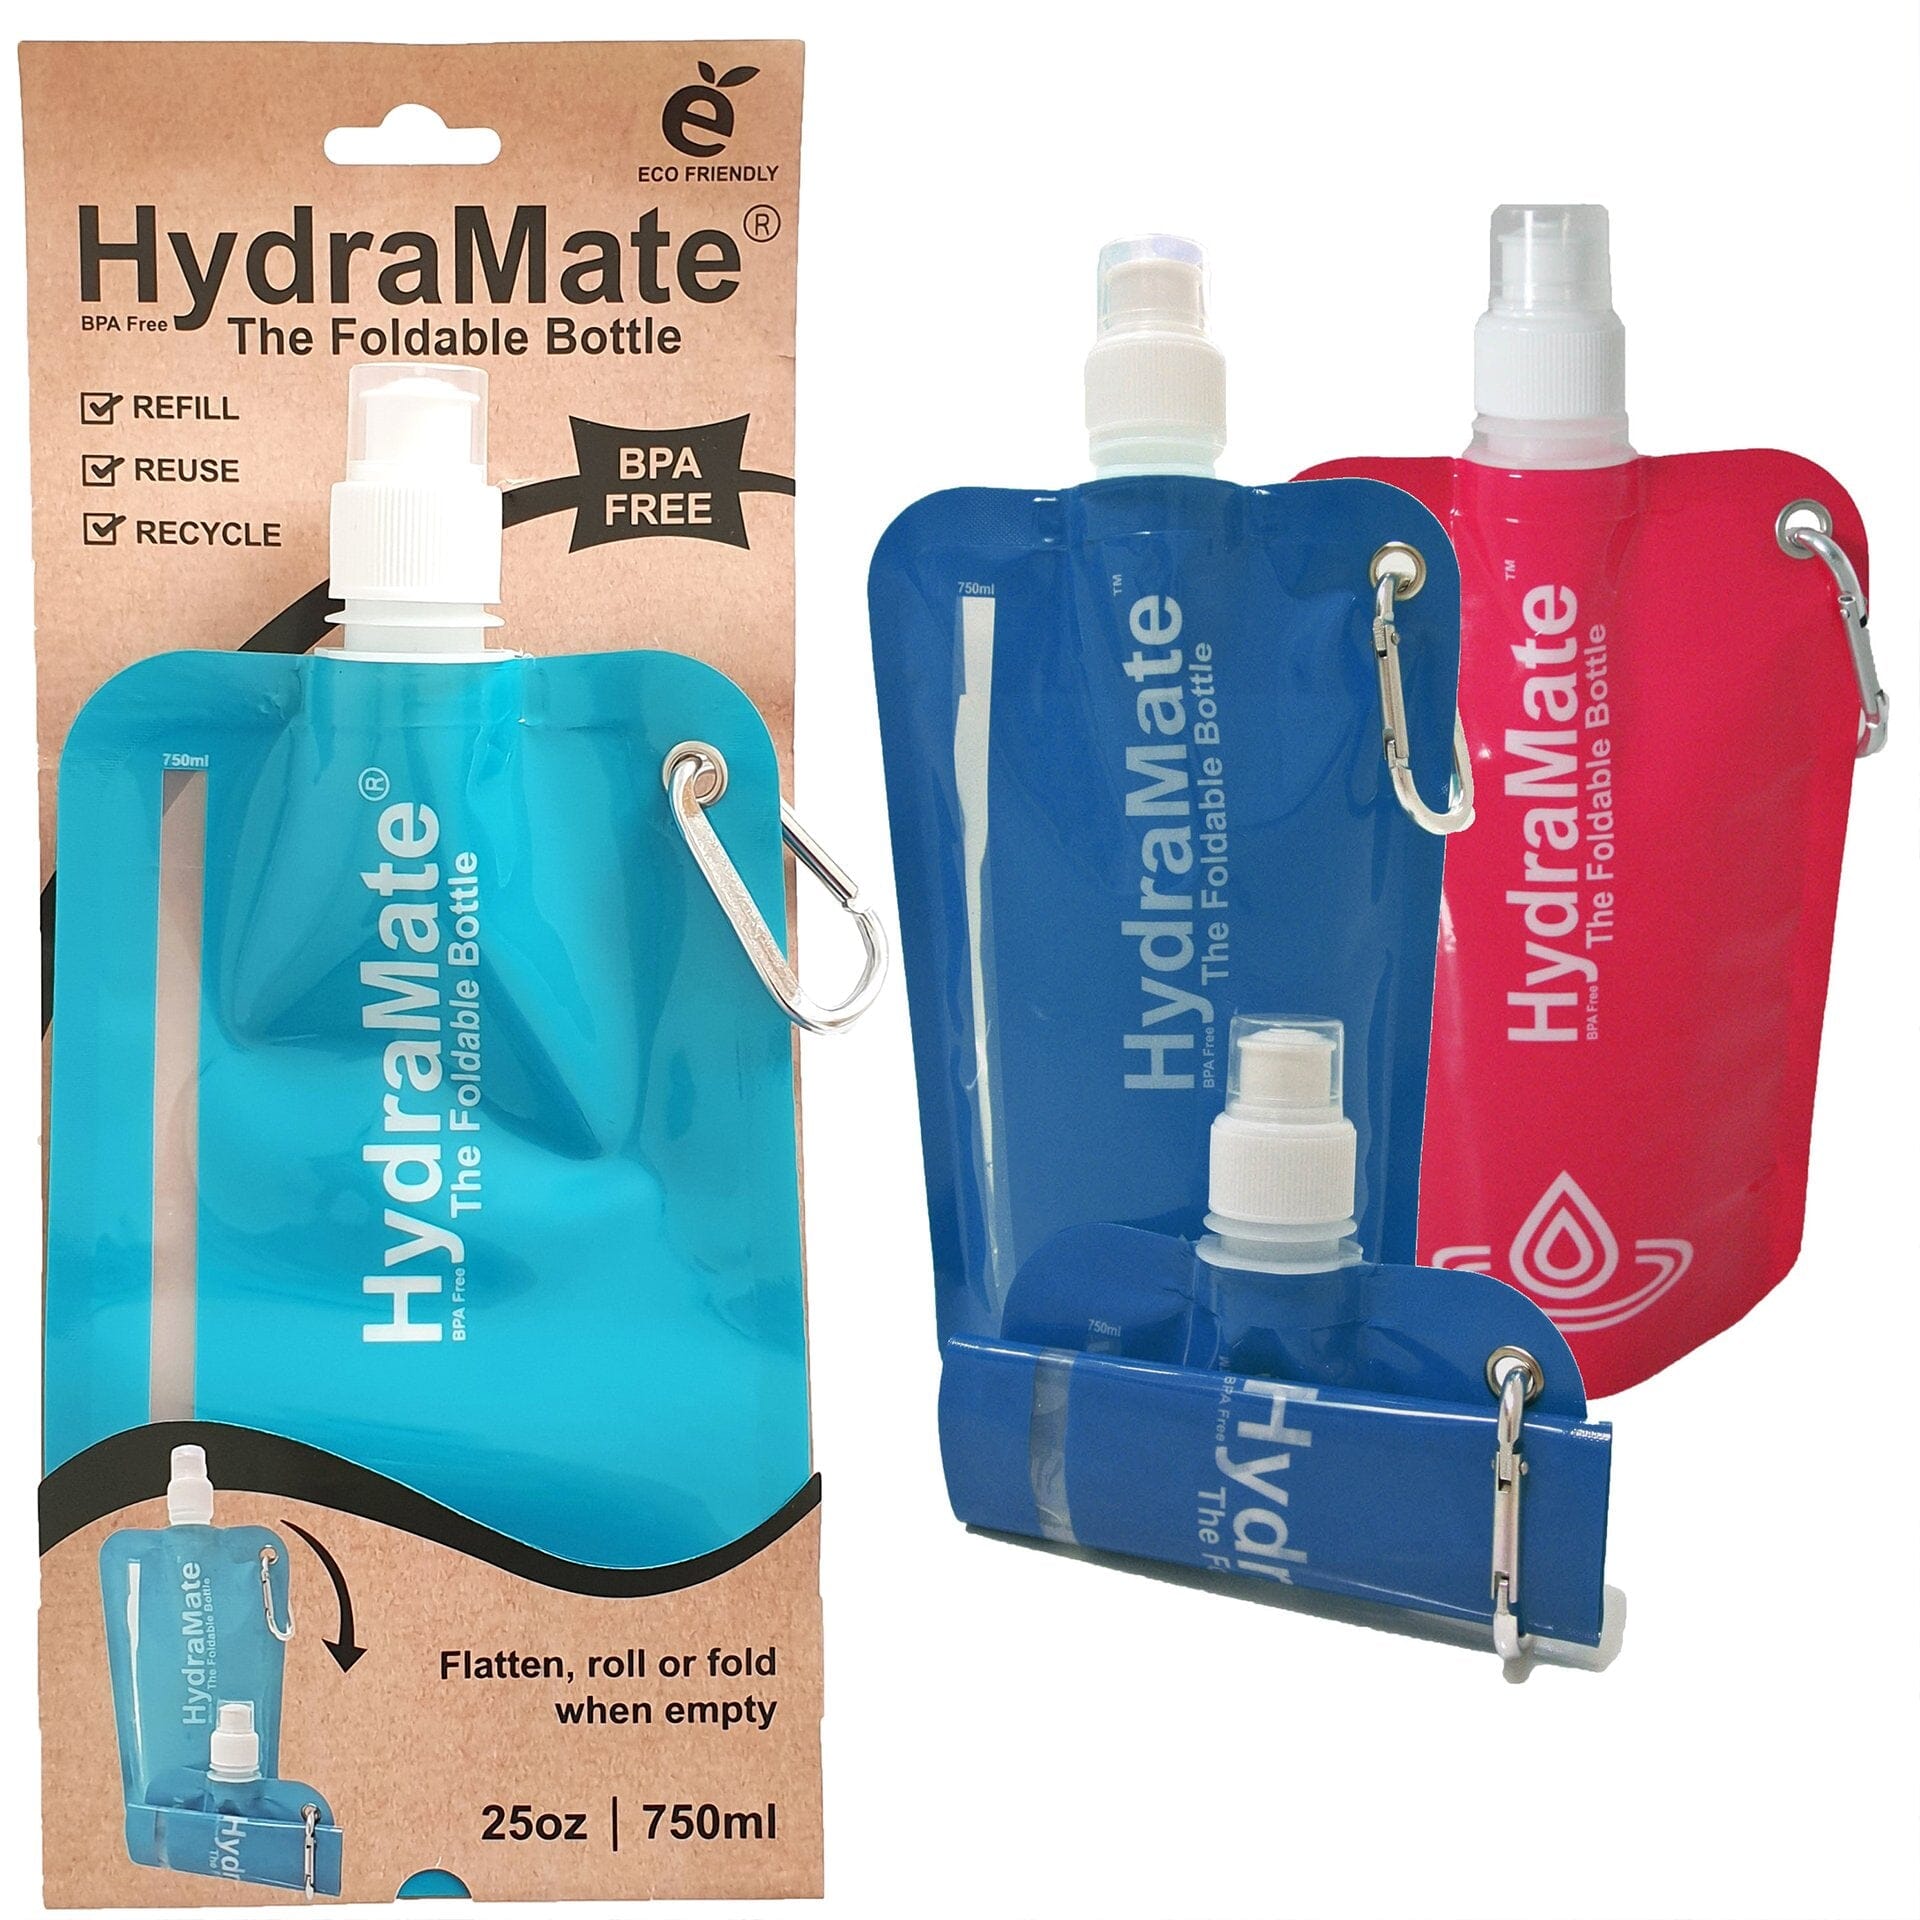 Hydramate foldable bottles water filter straw and female urinal funnel